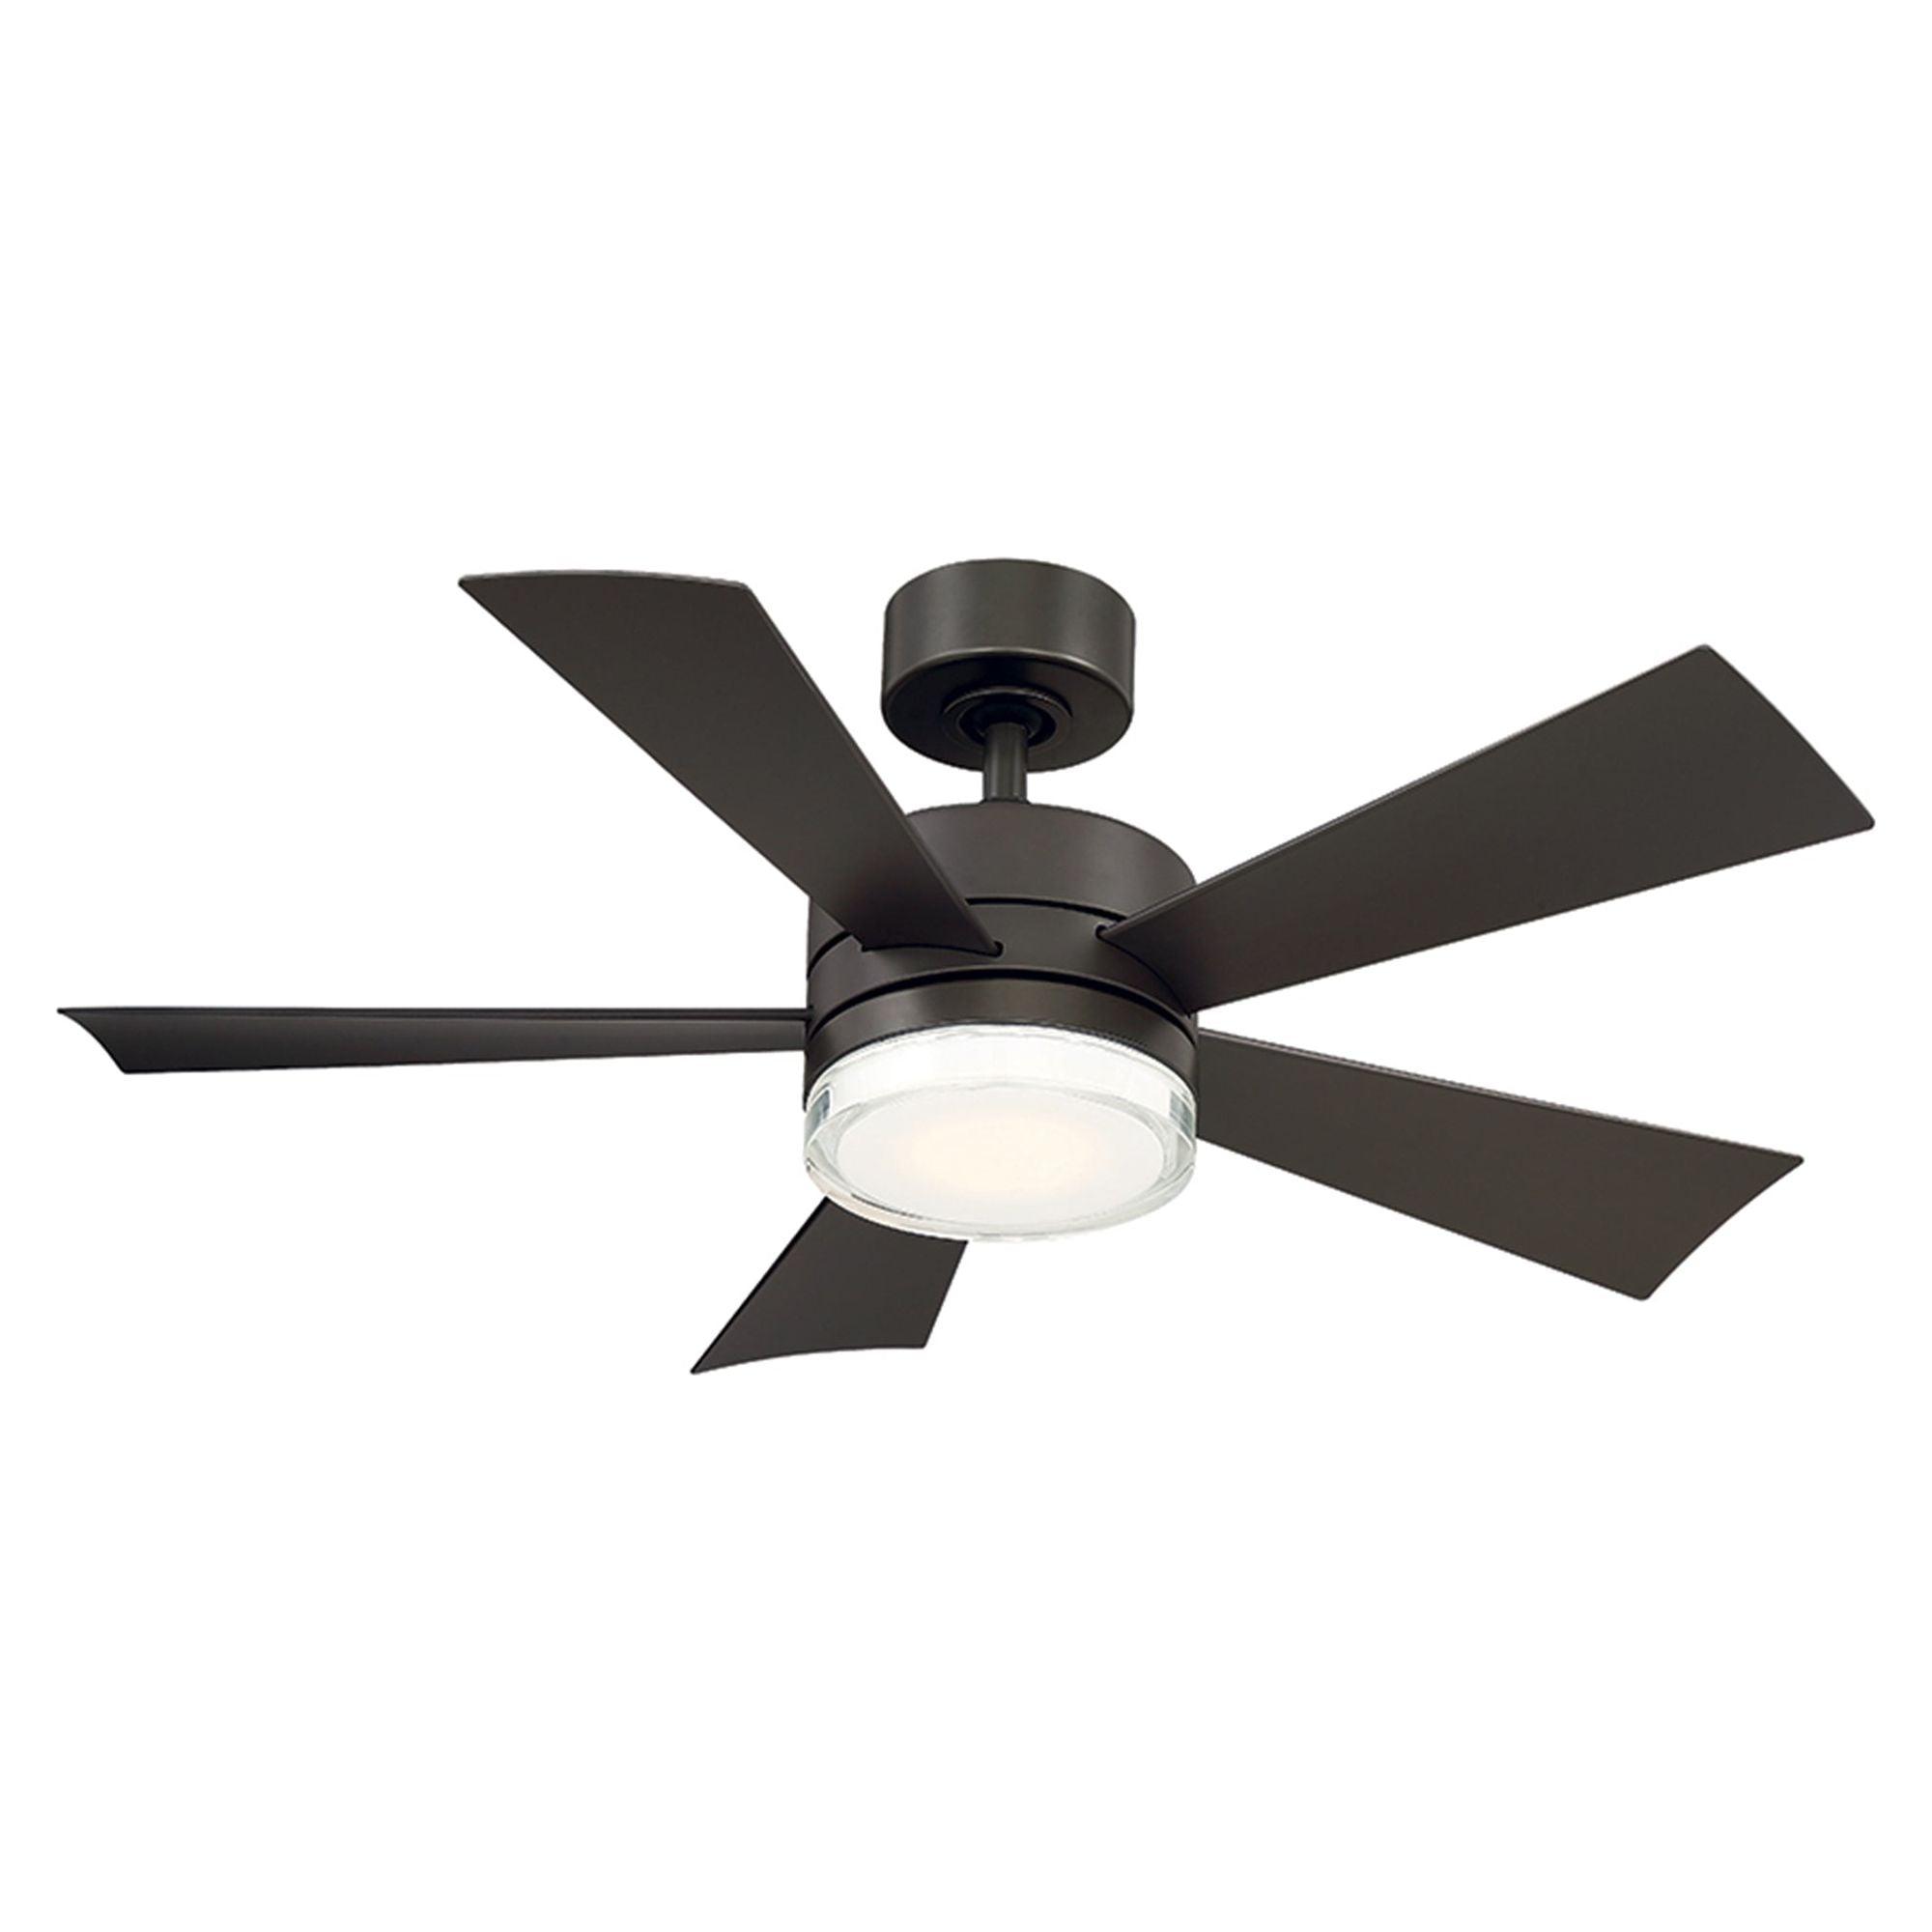 Modern Forms - Wynd Indoor/Outdoor 5-Blade 42" Smart Ceiling Fan with LED Light Kit and Remote Control - Lights Canada